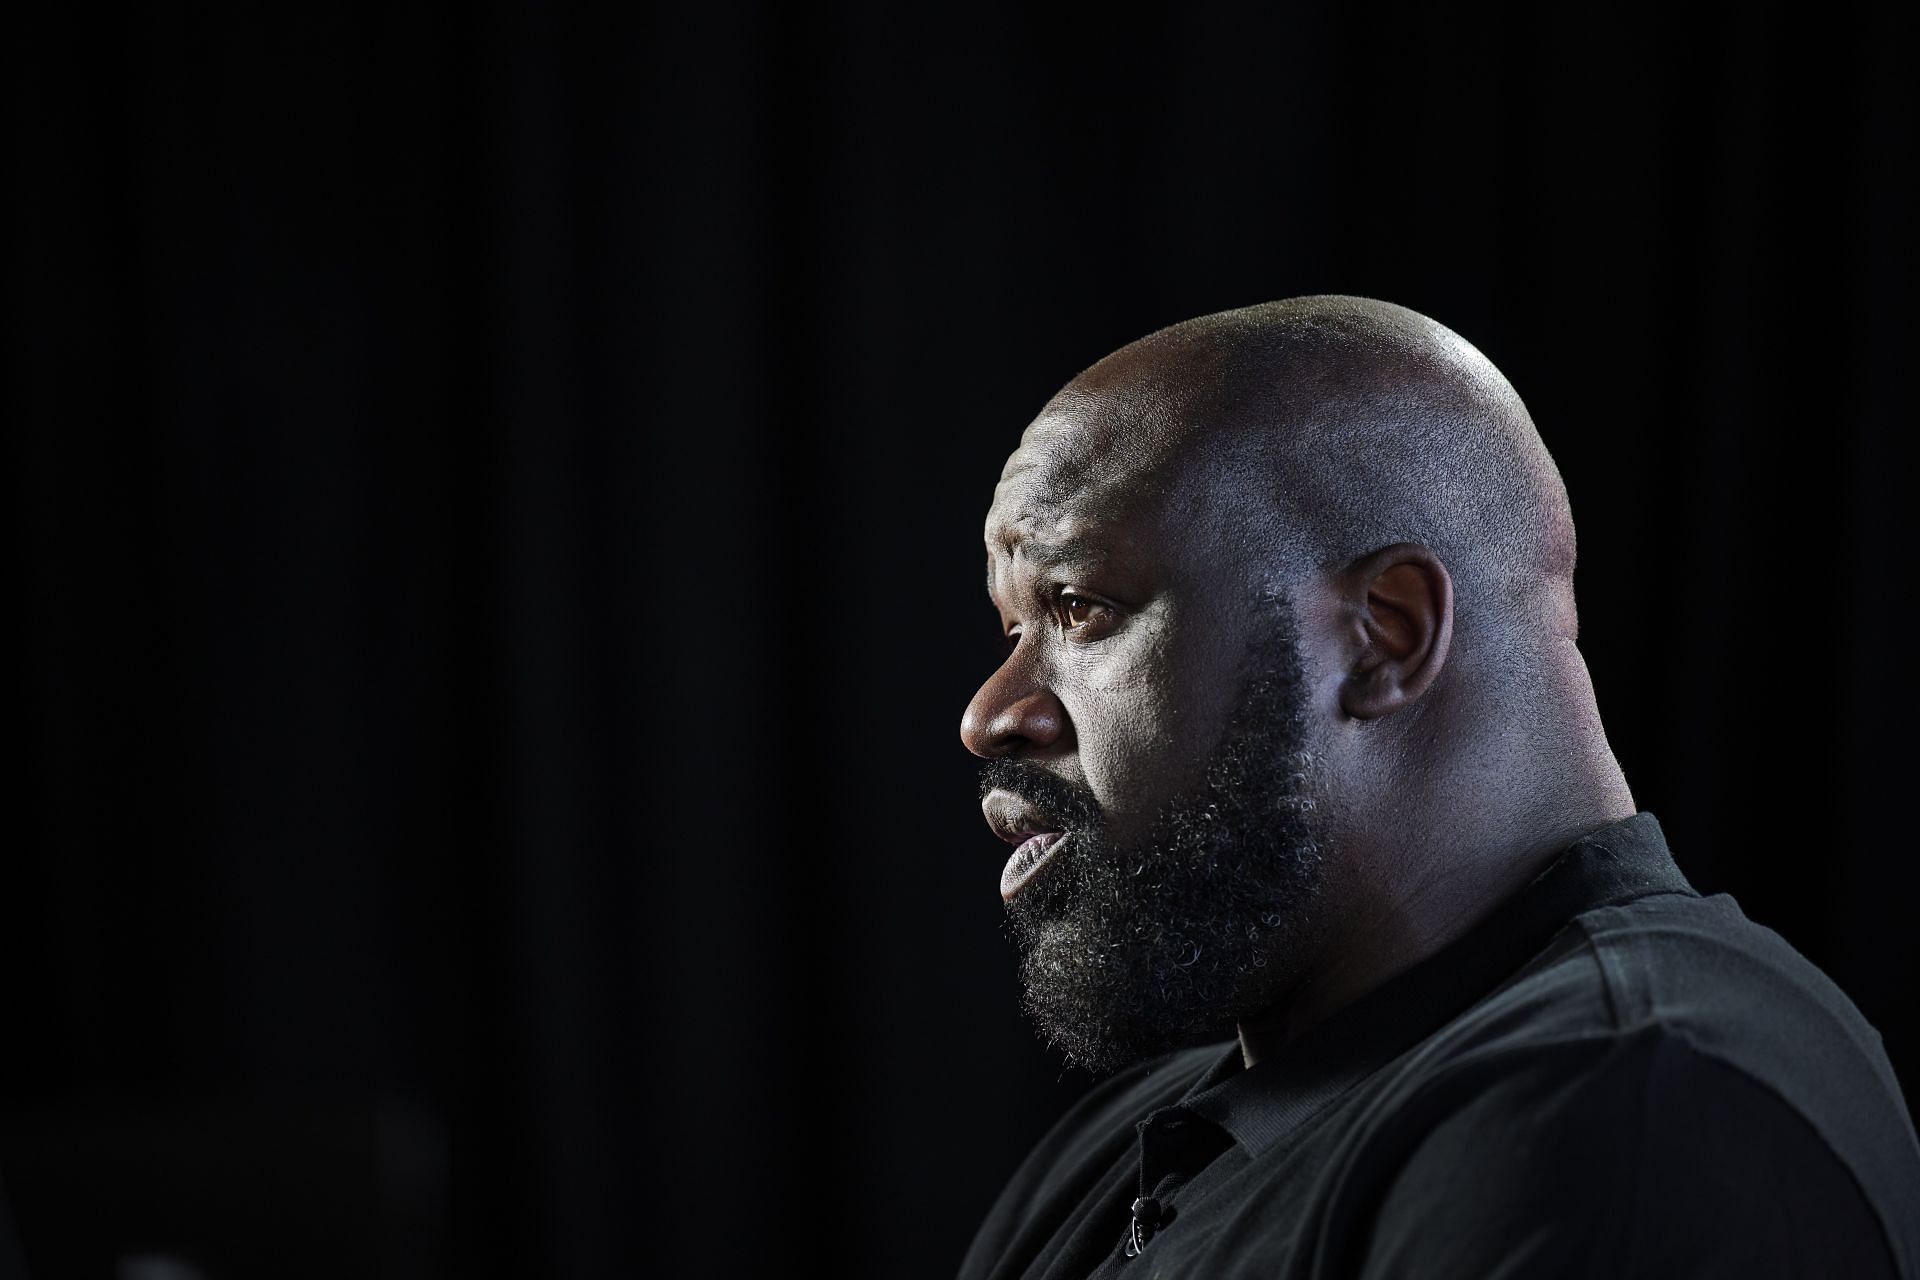 Fans pour in rib-tickling reactions to Shaquille O'Neal's new haircut:  